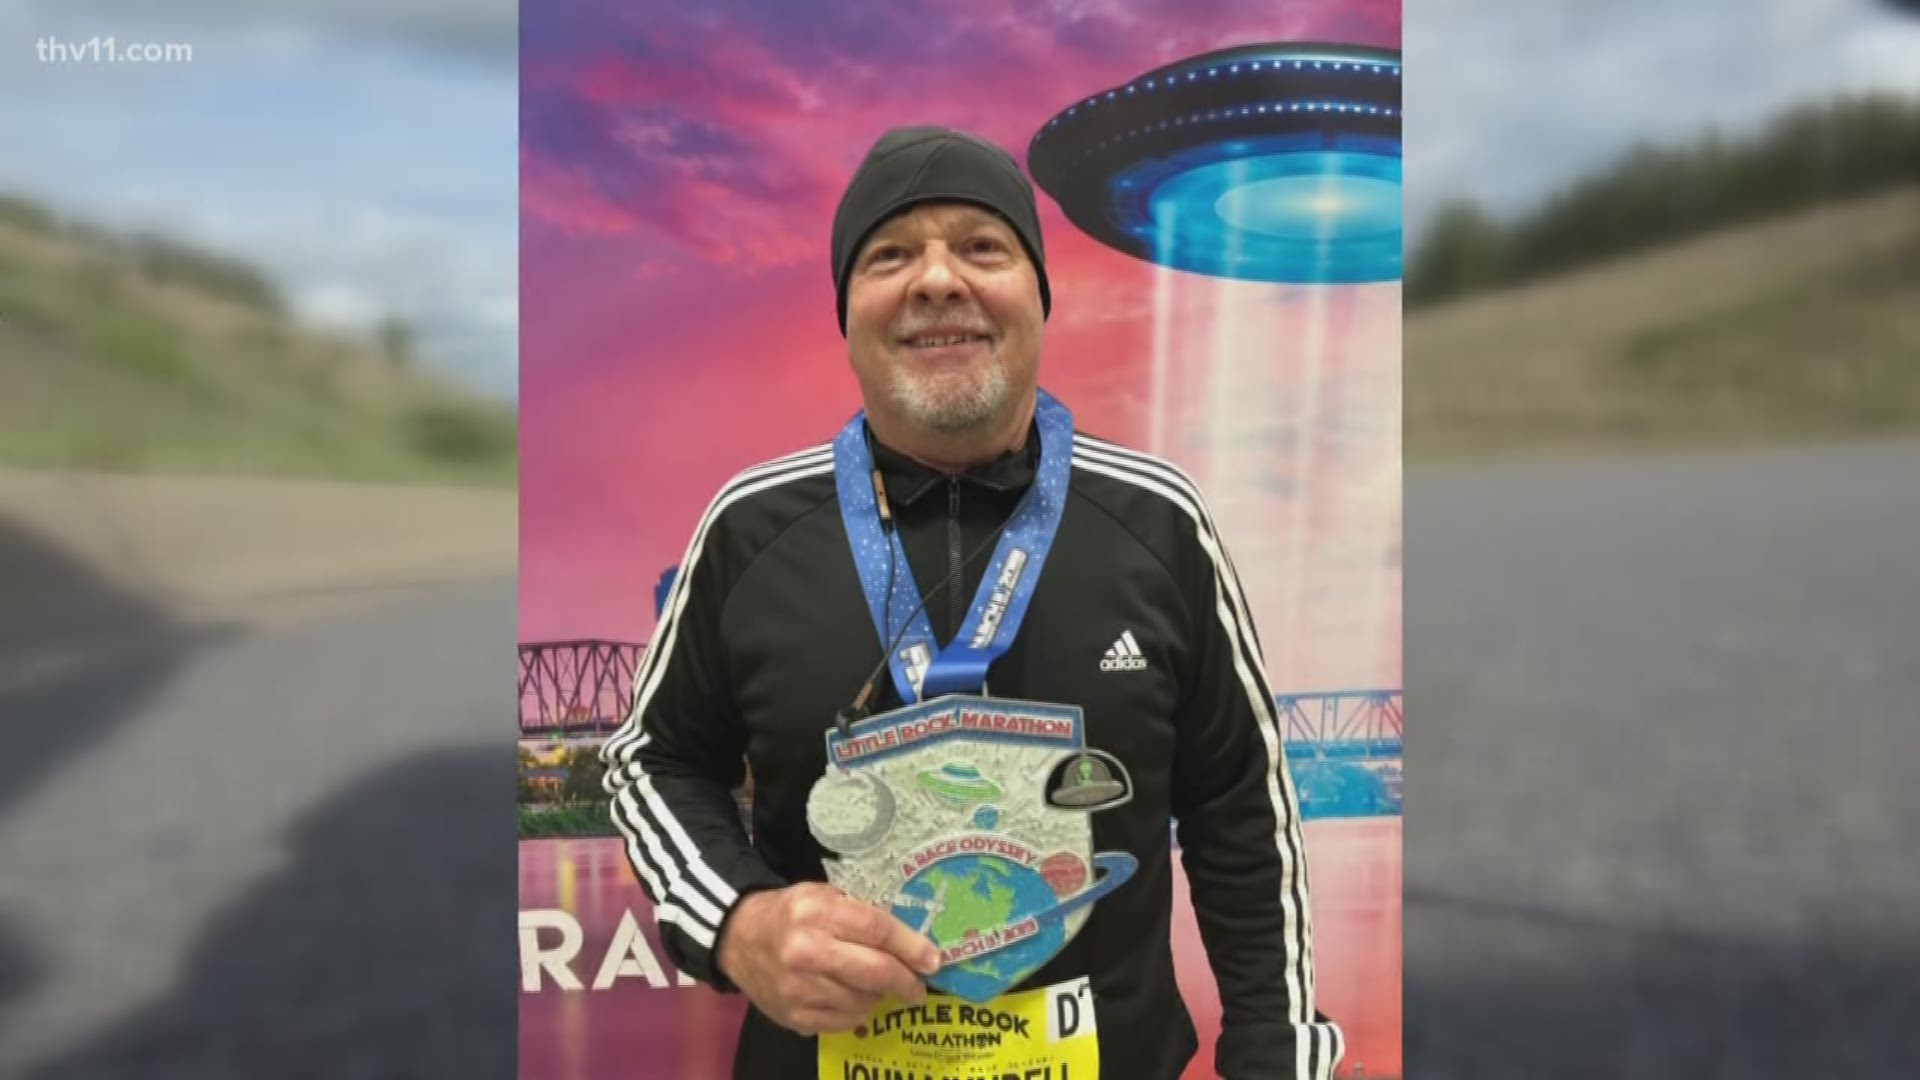 On Thursday evening, cyclist John Mundell was struck and killed while on his bicycle. There aren't any leads on who hit him and Sherwood police are asking for help in finding out any information on who hit him.